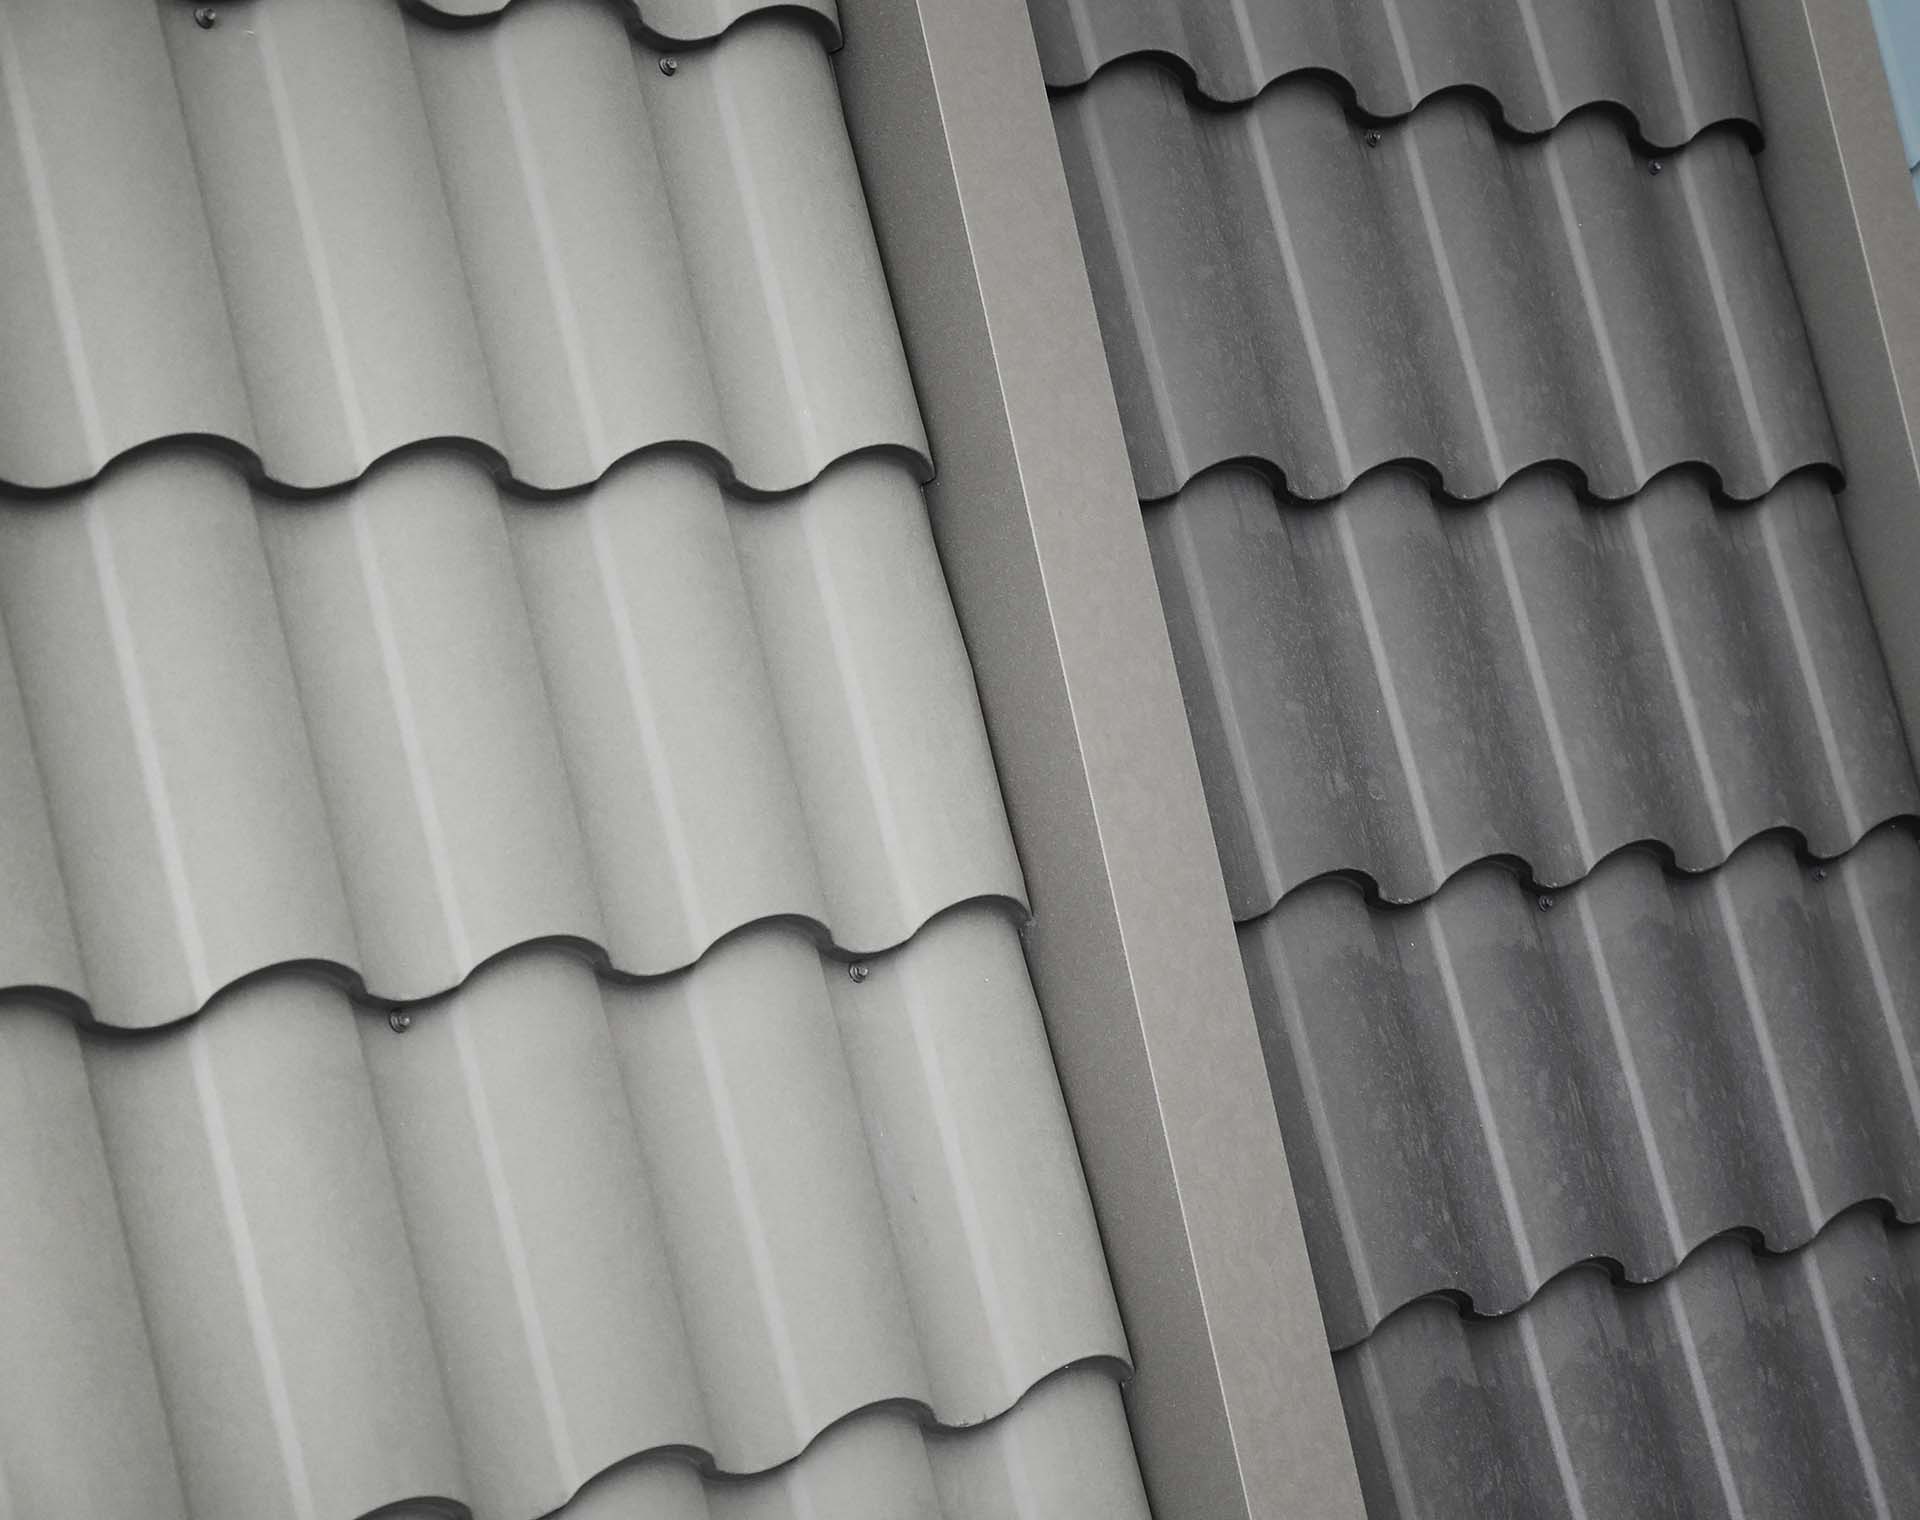 THE HIGHEST QUALITY ROOFING MATERIALS